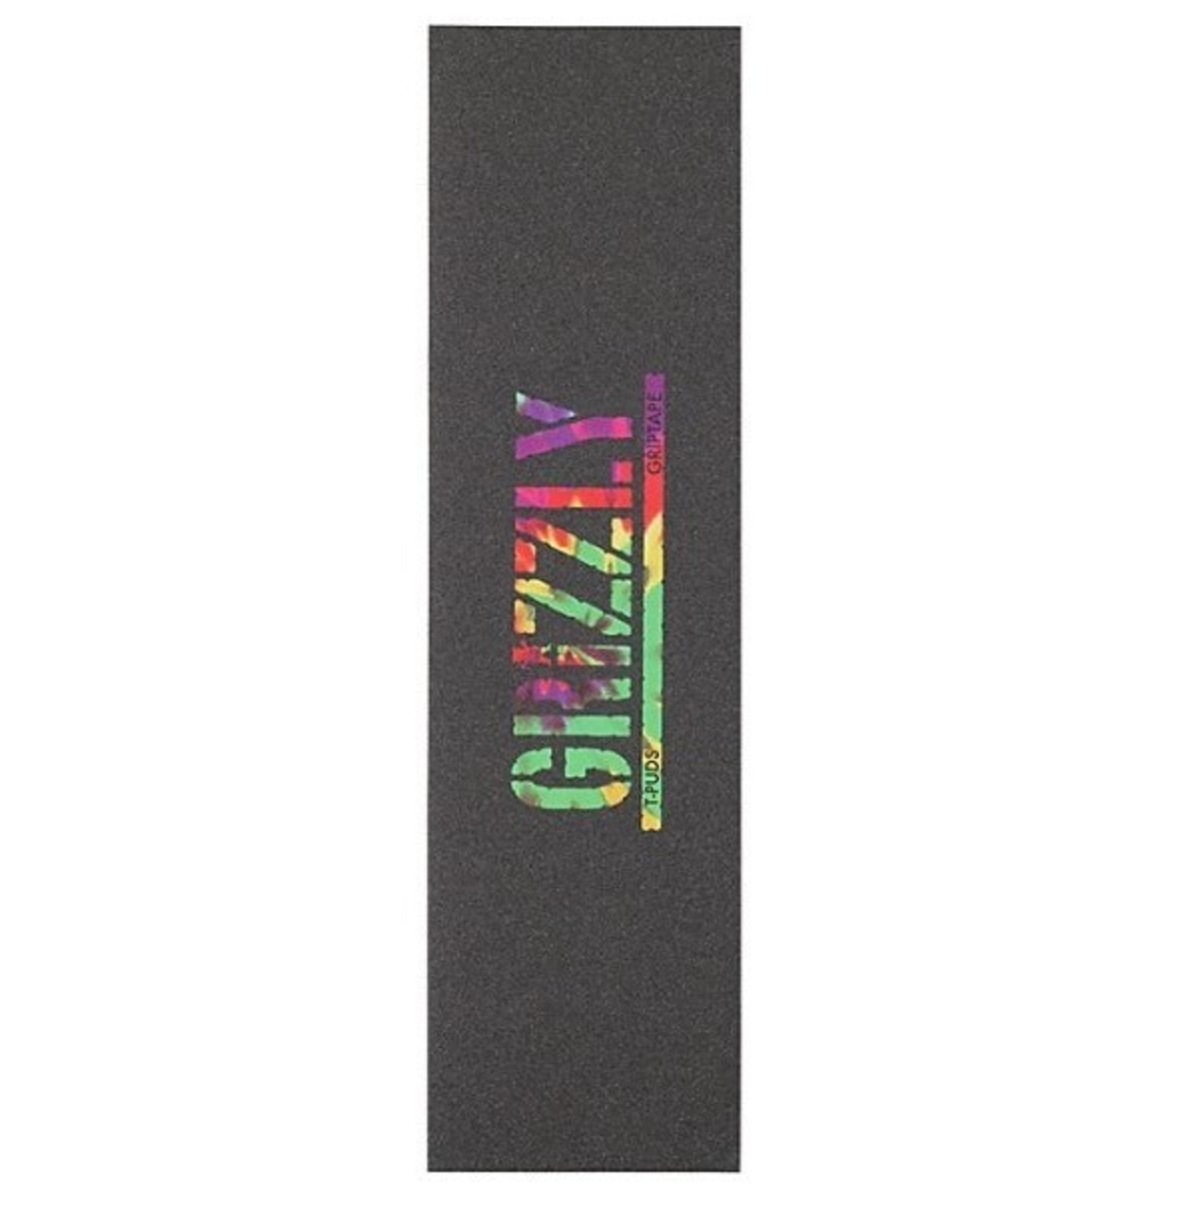 Grizzly Griptape Grizzly T Puds Stamp Tye Dye Grip Tape 9インチ グリズリー グリップテープ トリーパッドウィル スタンプ タイダイ Pretzels Skateboard And Culture